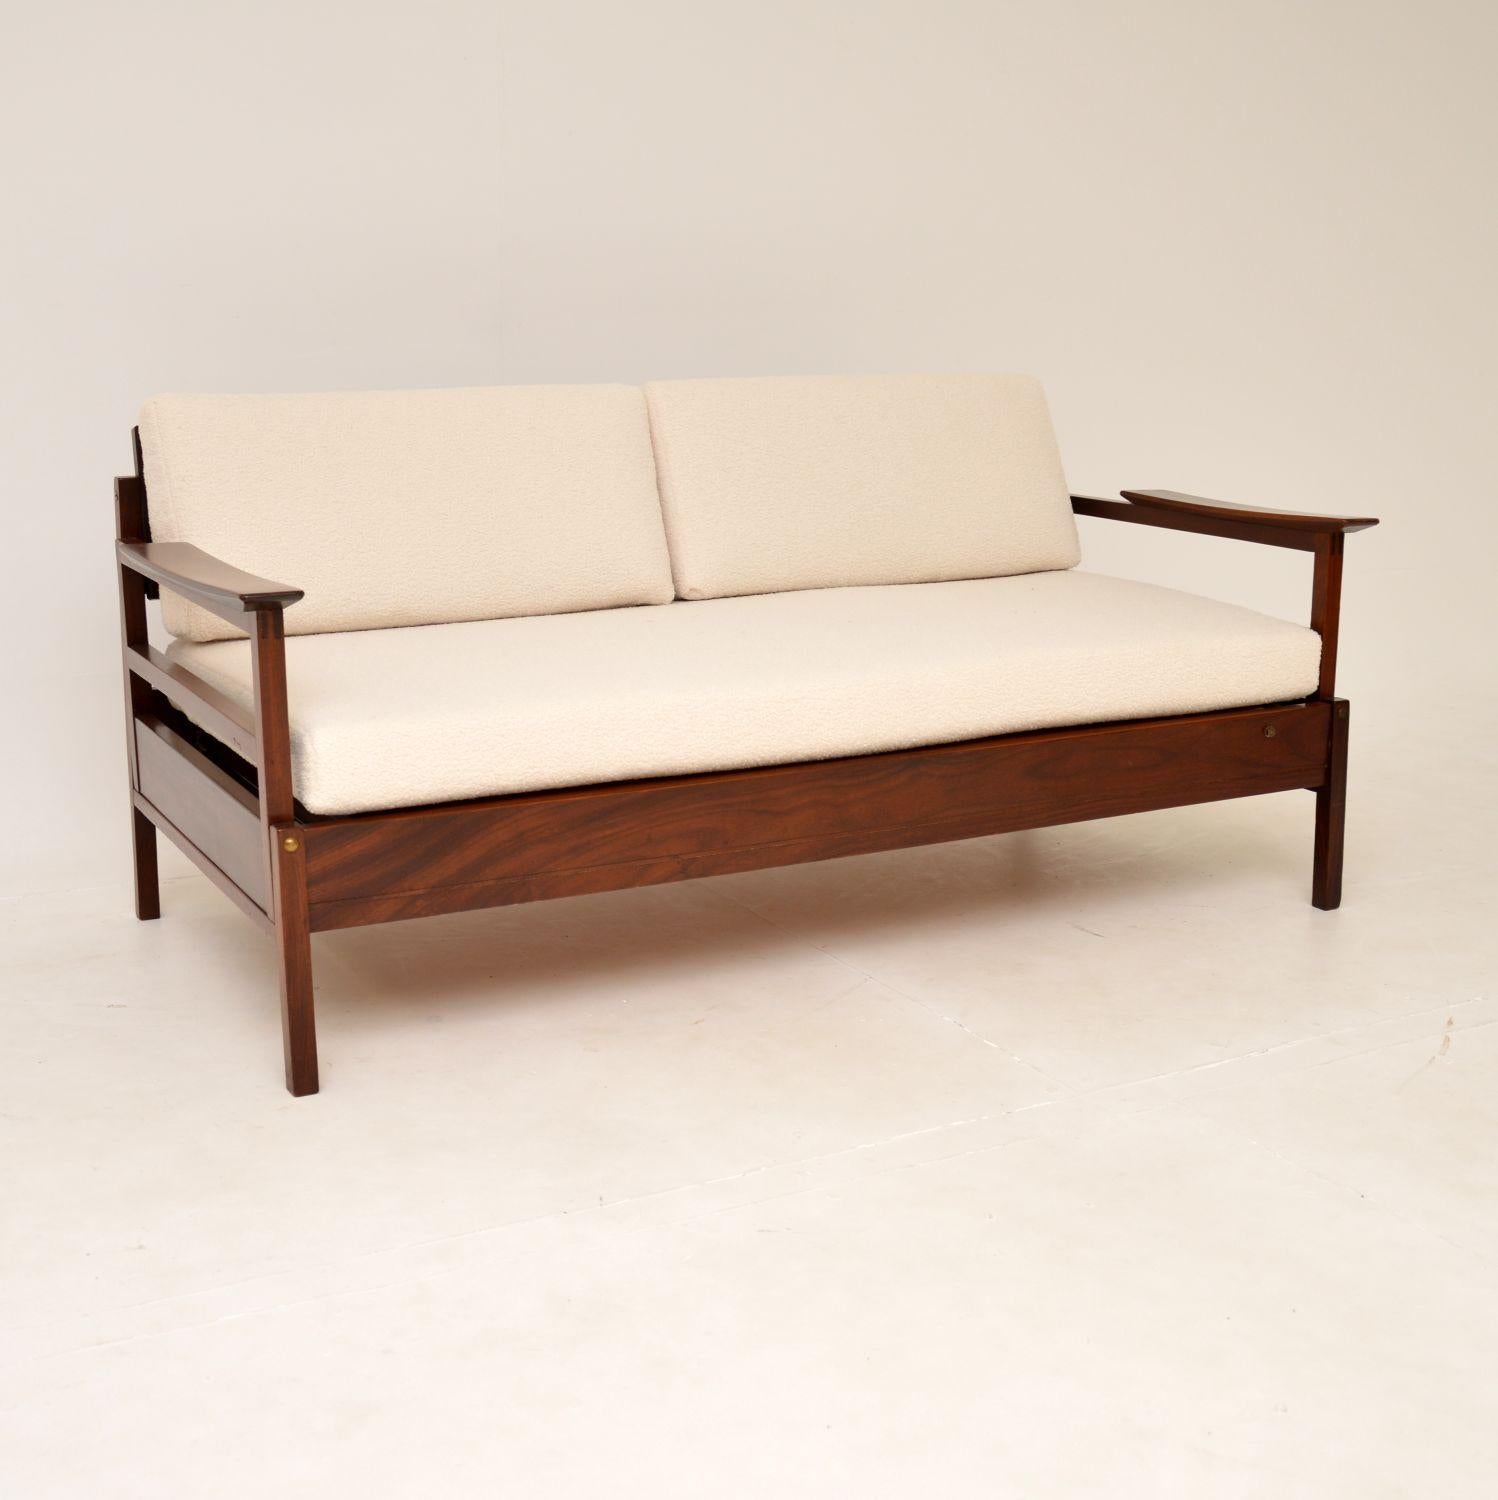 A stylish and very rare vintage ‘Gambit’ sofa bed by Guy Rogers. This was made in England during the 1960’s.

The frame is solid wood, which has gorgeous grain patterns and a beautiful, rich colour.

The arms drop down and the back cushions go